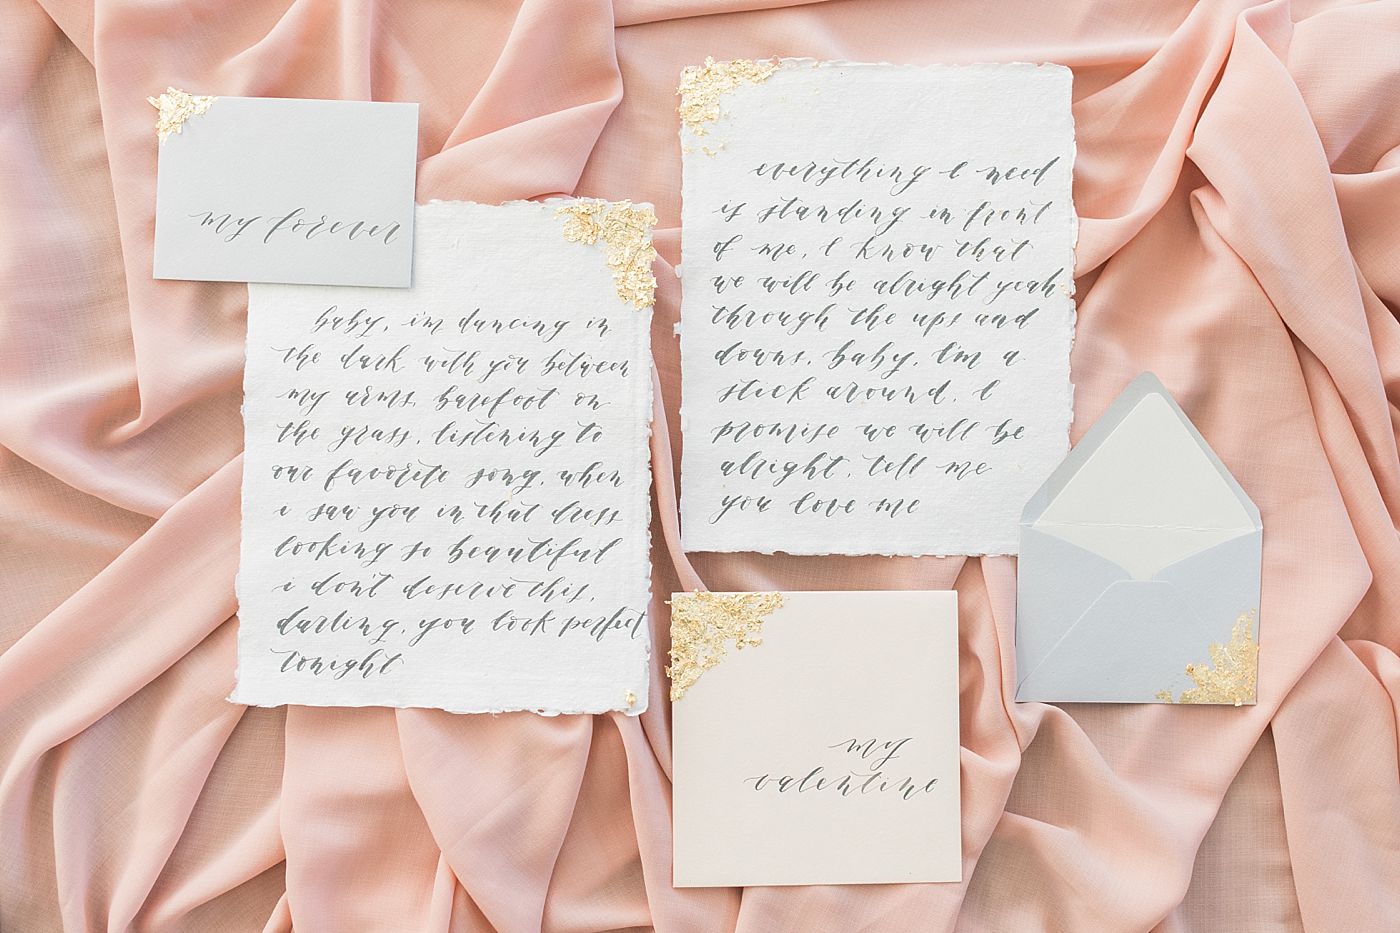 VALENTINES DAY LOVE LETTERS